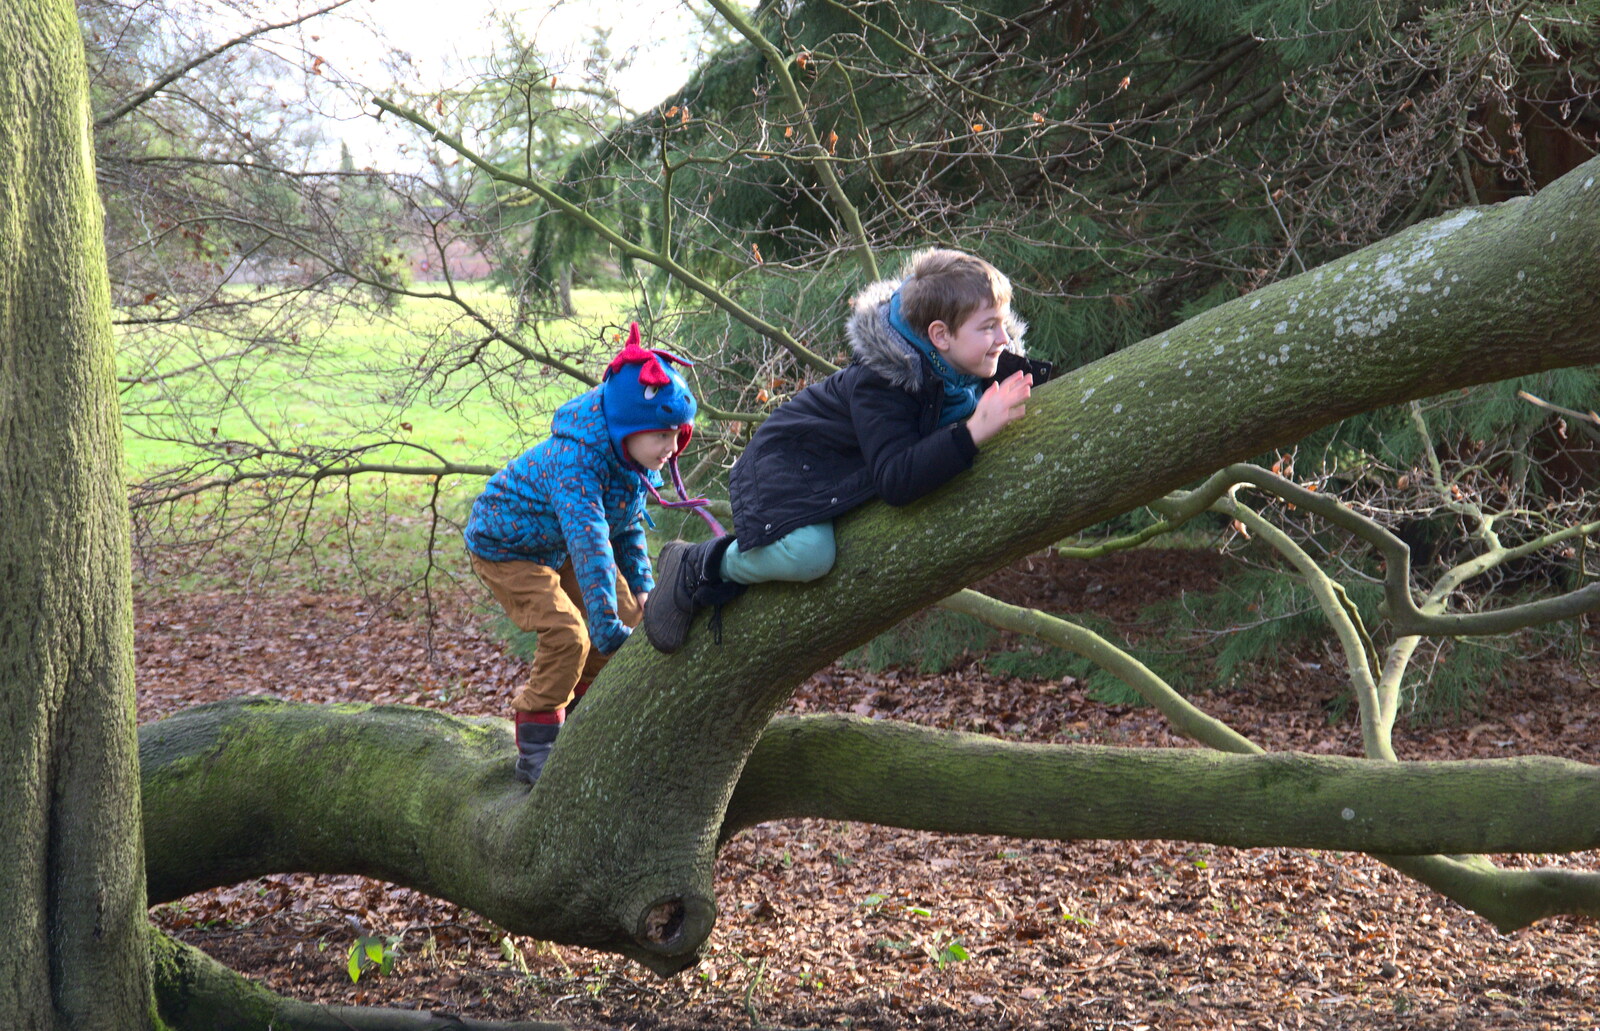 The boys find a climbey tree from Life Below Stairs, Ickworth House, Horringer, Suffolk - 28th January 2018